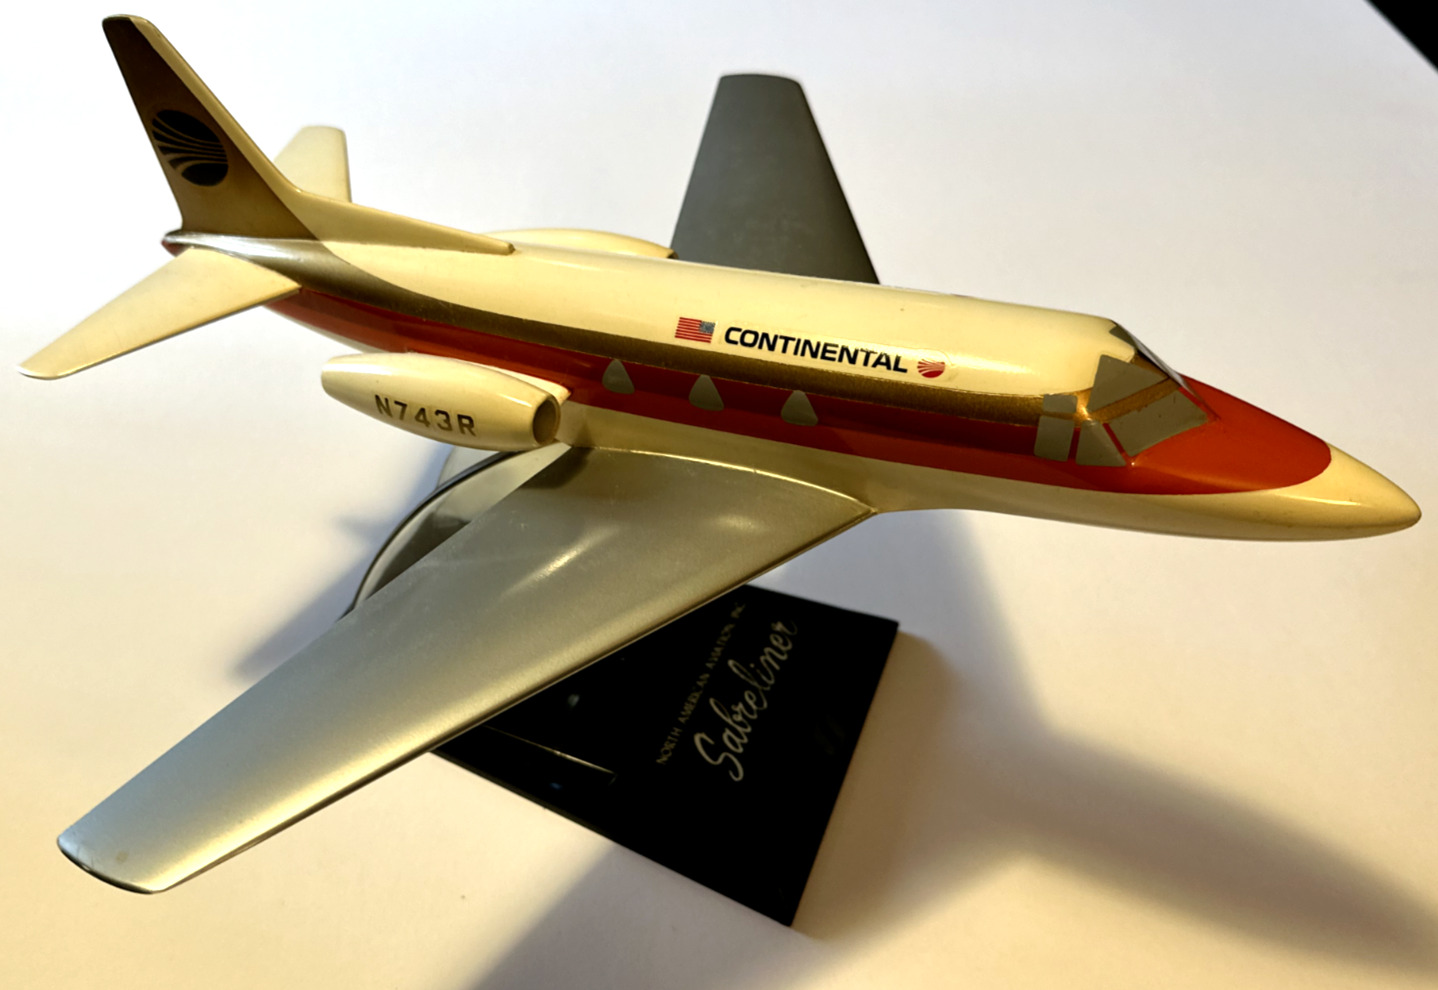 North American Saberliner Continental Airlines Display Model - RARE